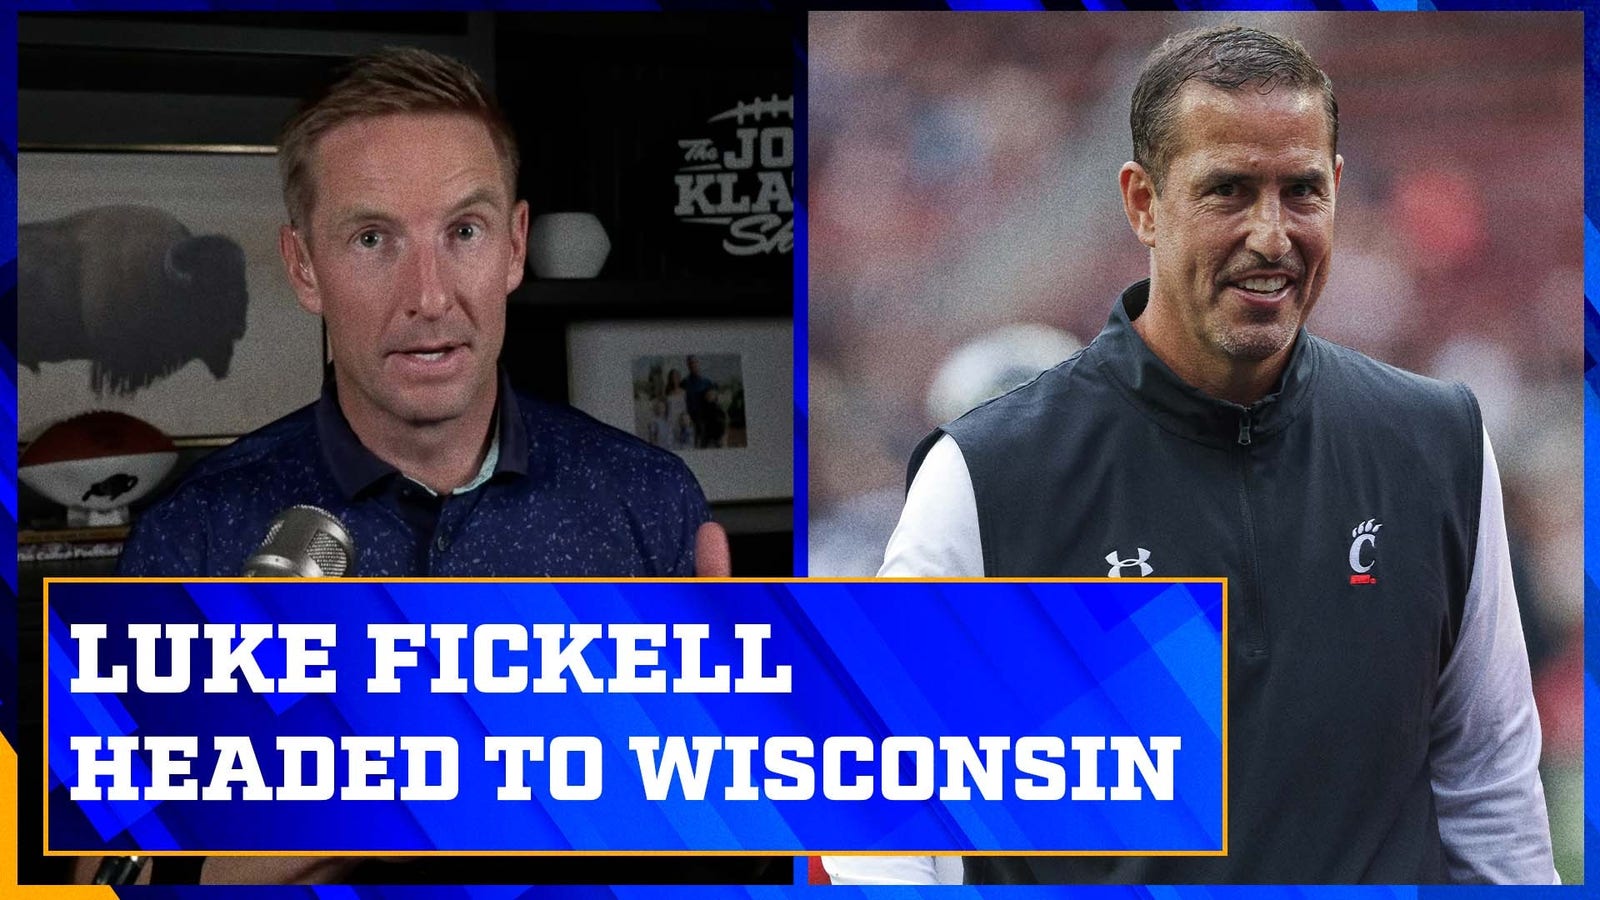 Can Luke Fickell lead Wisconsin to the CFP?